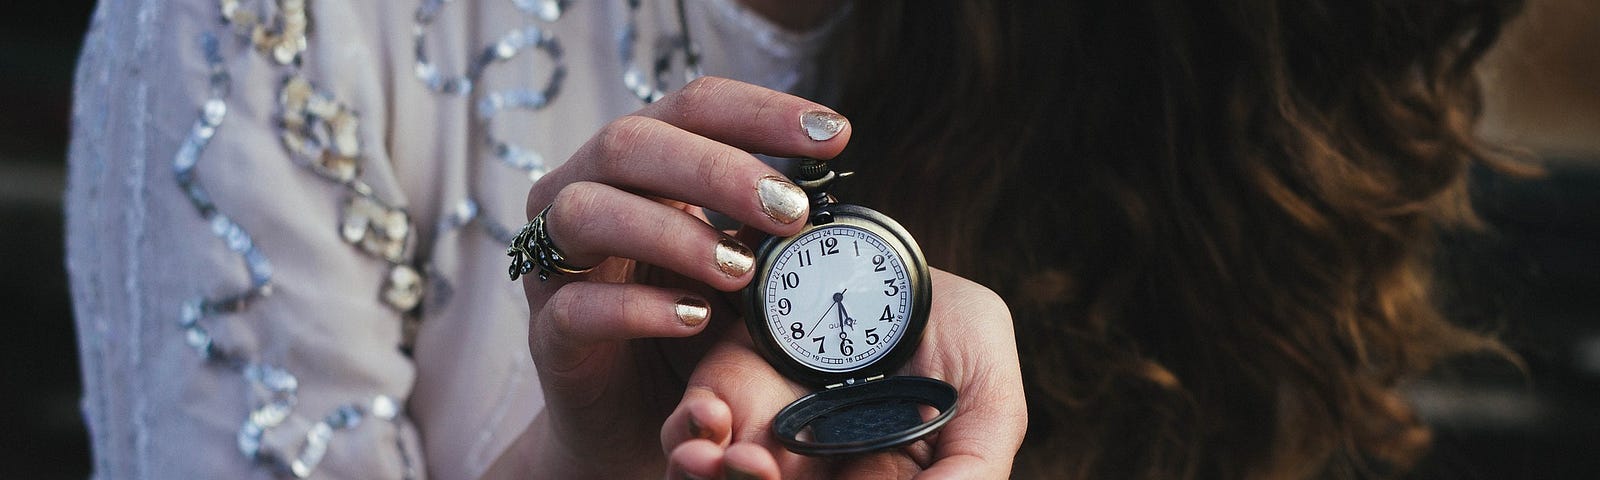 Woman in white top holding an open chain clock